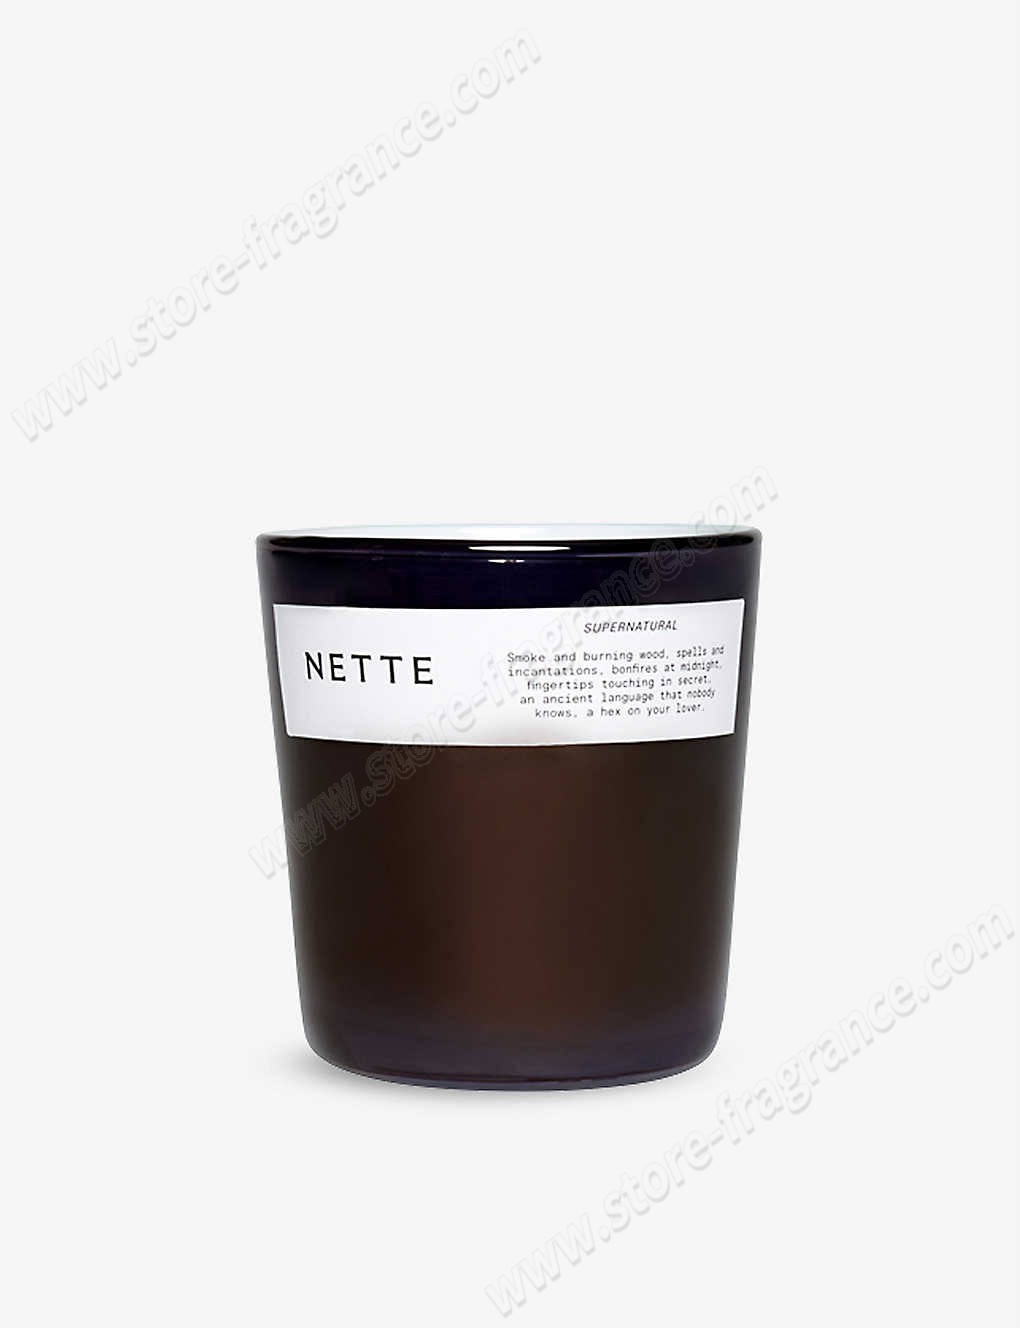 NETTE/Supernatural scented candle 20.6oz ✿ Discount Store - NETTE/Supernatural scented candle 20.6oz ✿ Discount Store